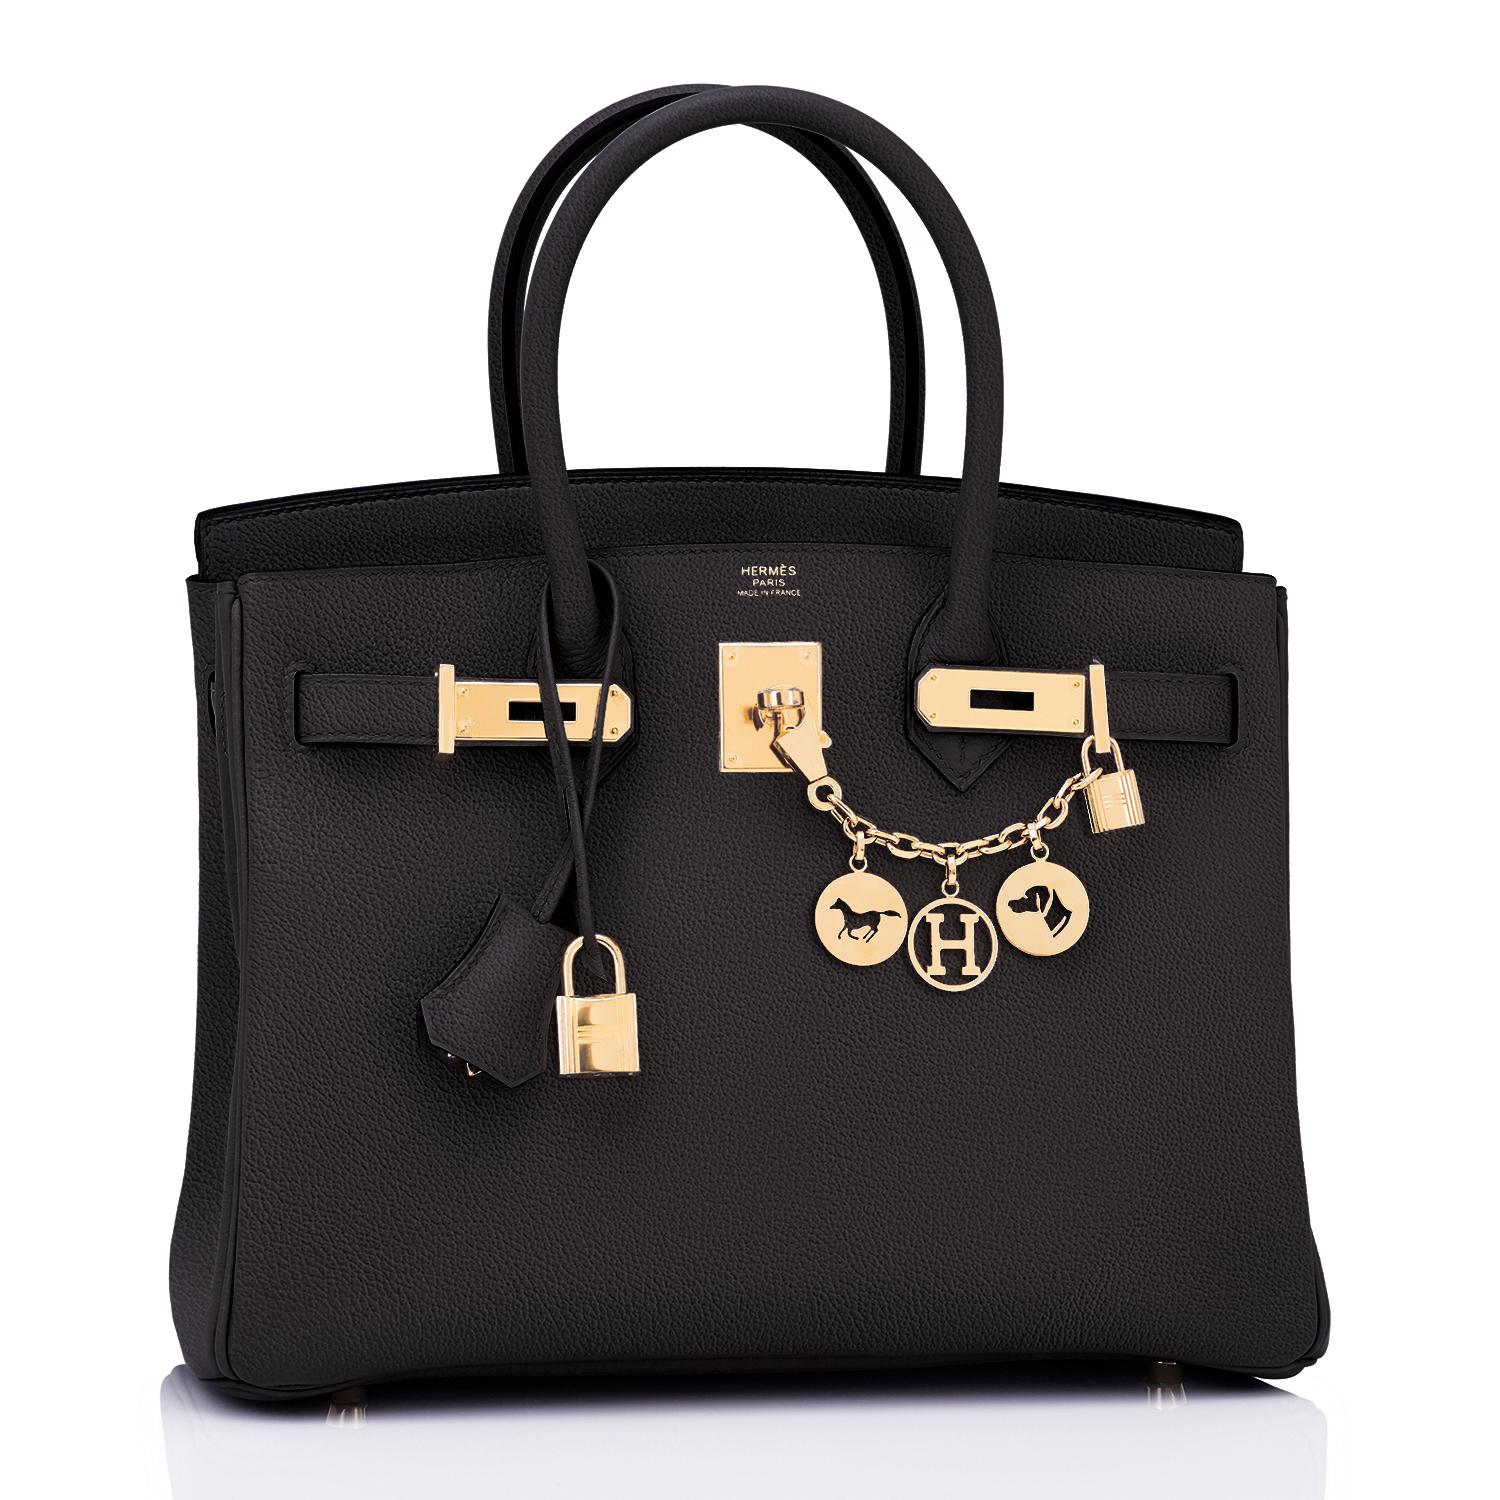 Hermes Birkin 30cm Black Noir Gold Hardware Novillo Bag NEW RARE
Black Novillo with Gold is a devastatingly gorgeous and ultra rare combination!
Brand New in Box. Store Fresh. Pristine Condition (with plastic on hardware)
Perfect gift! Comes with